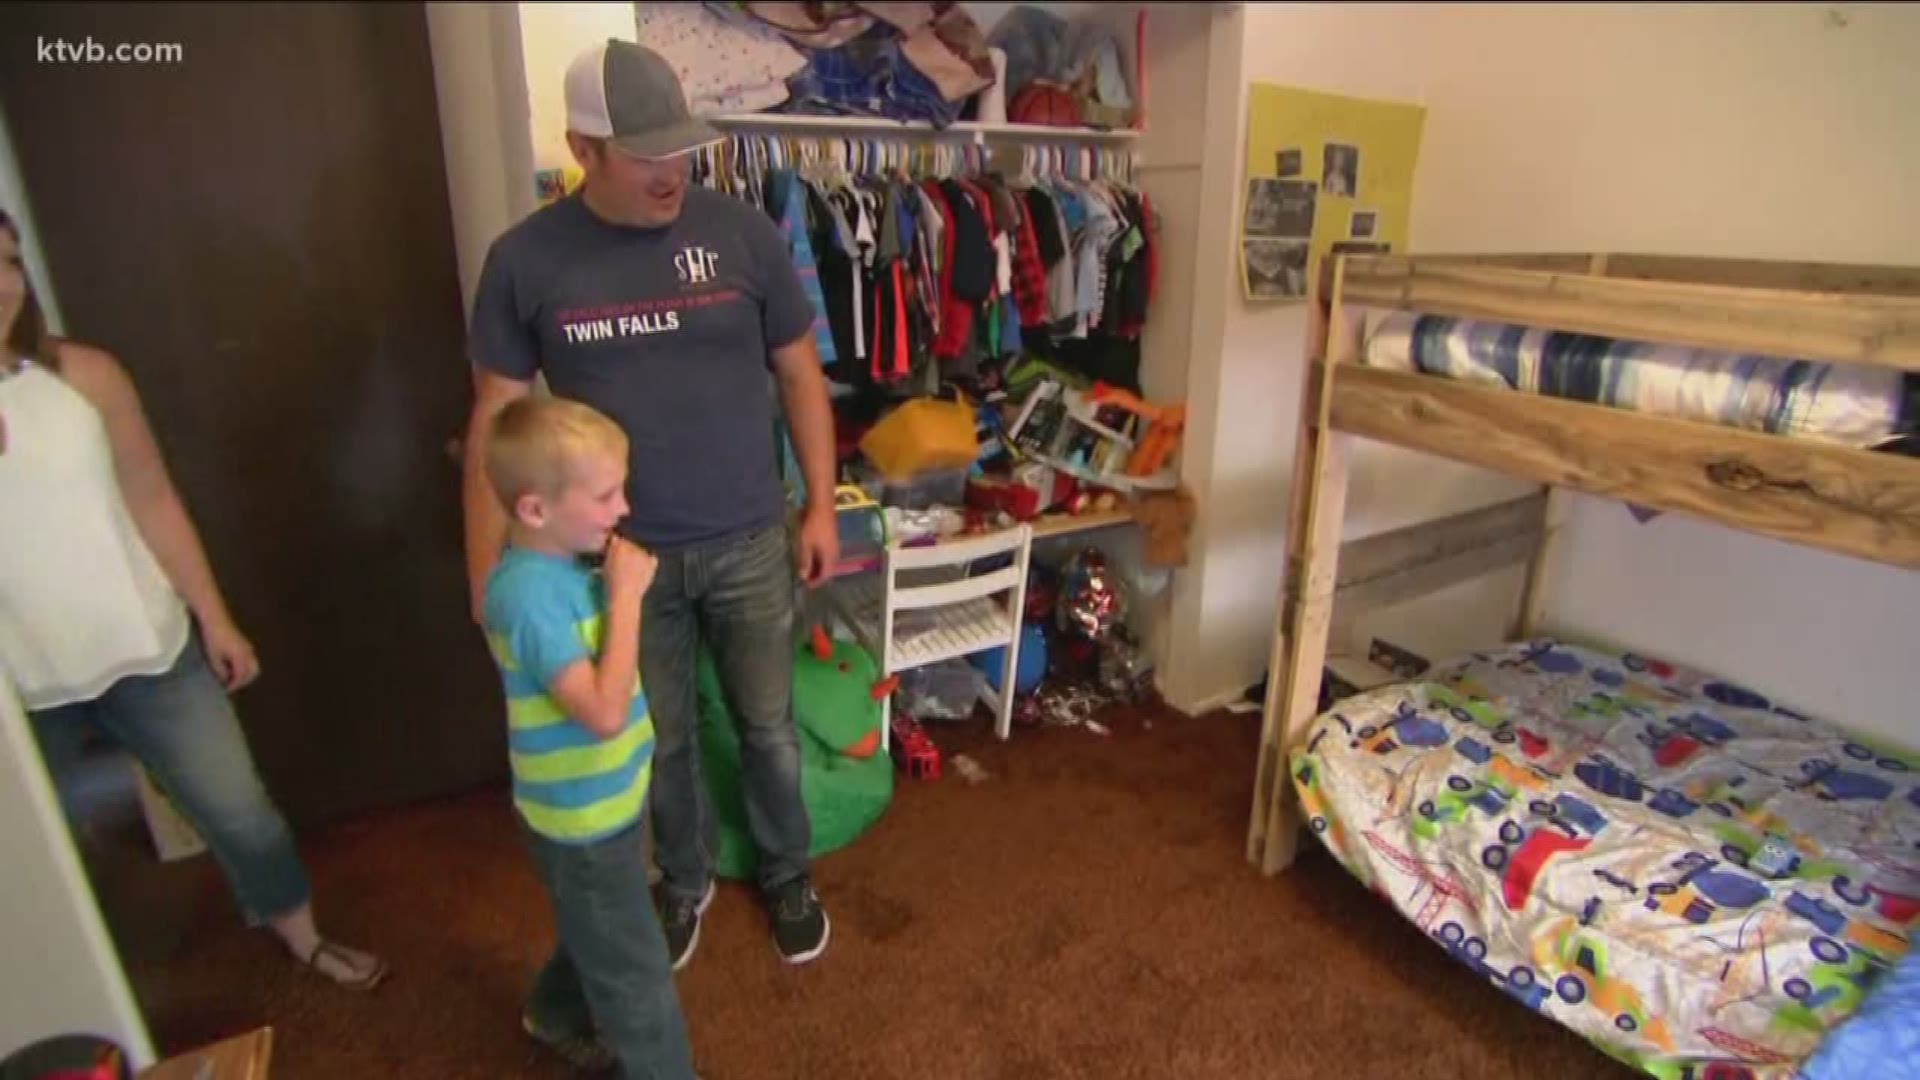 His nonprofit makes bunk beds for families in need.